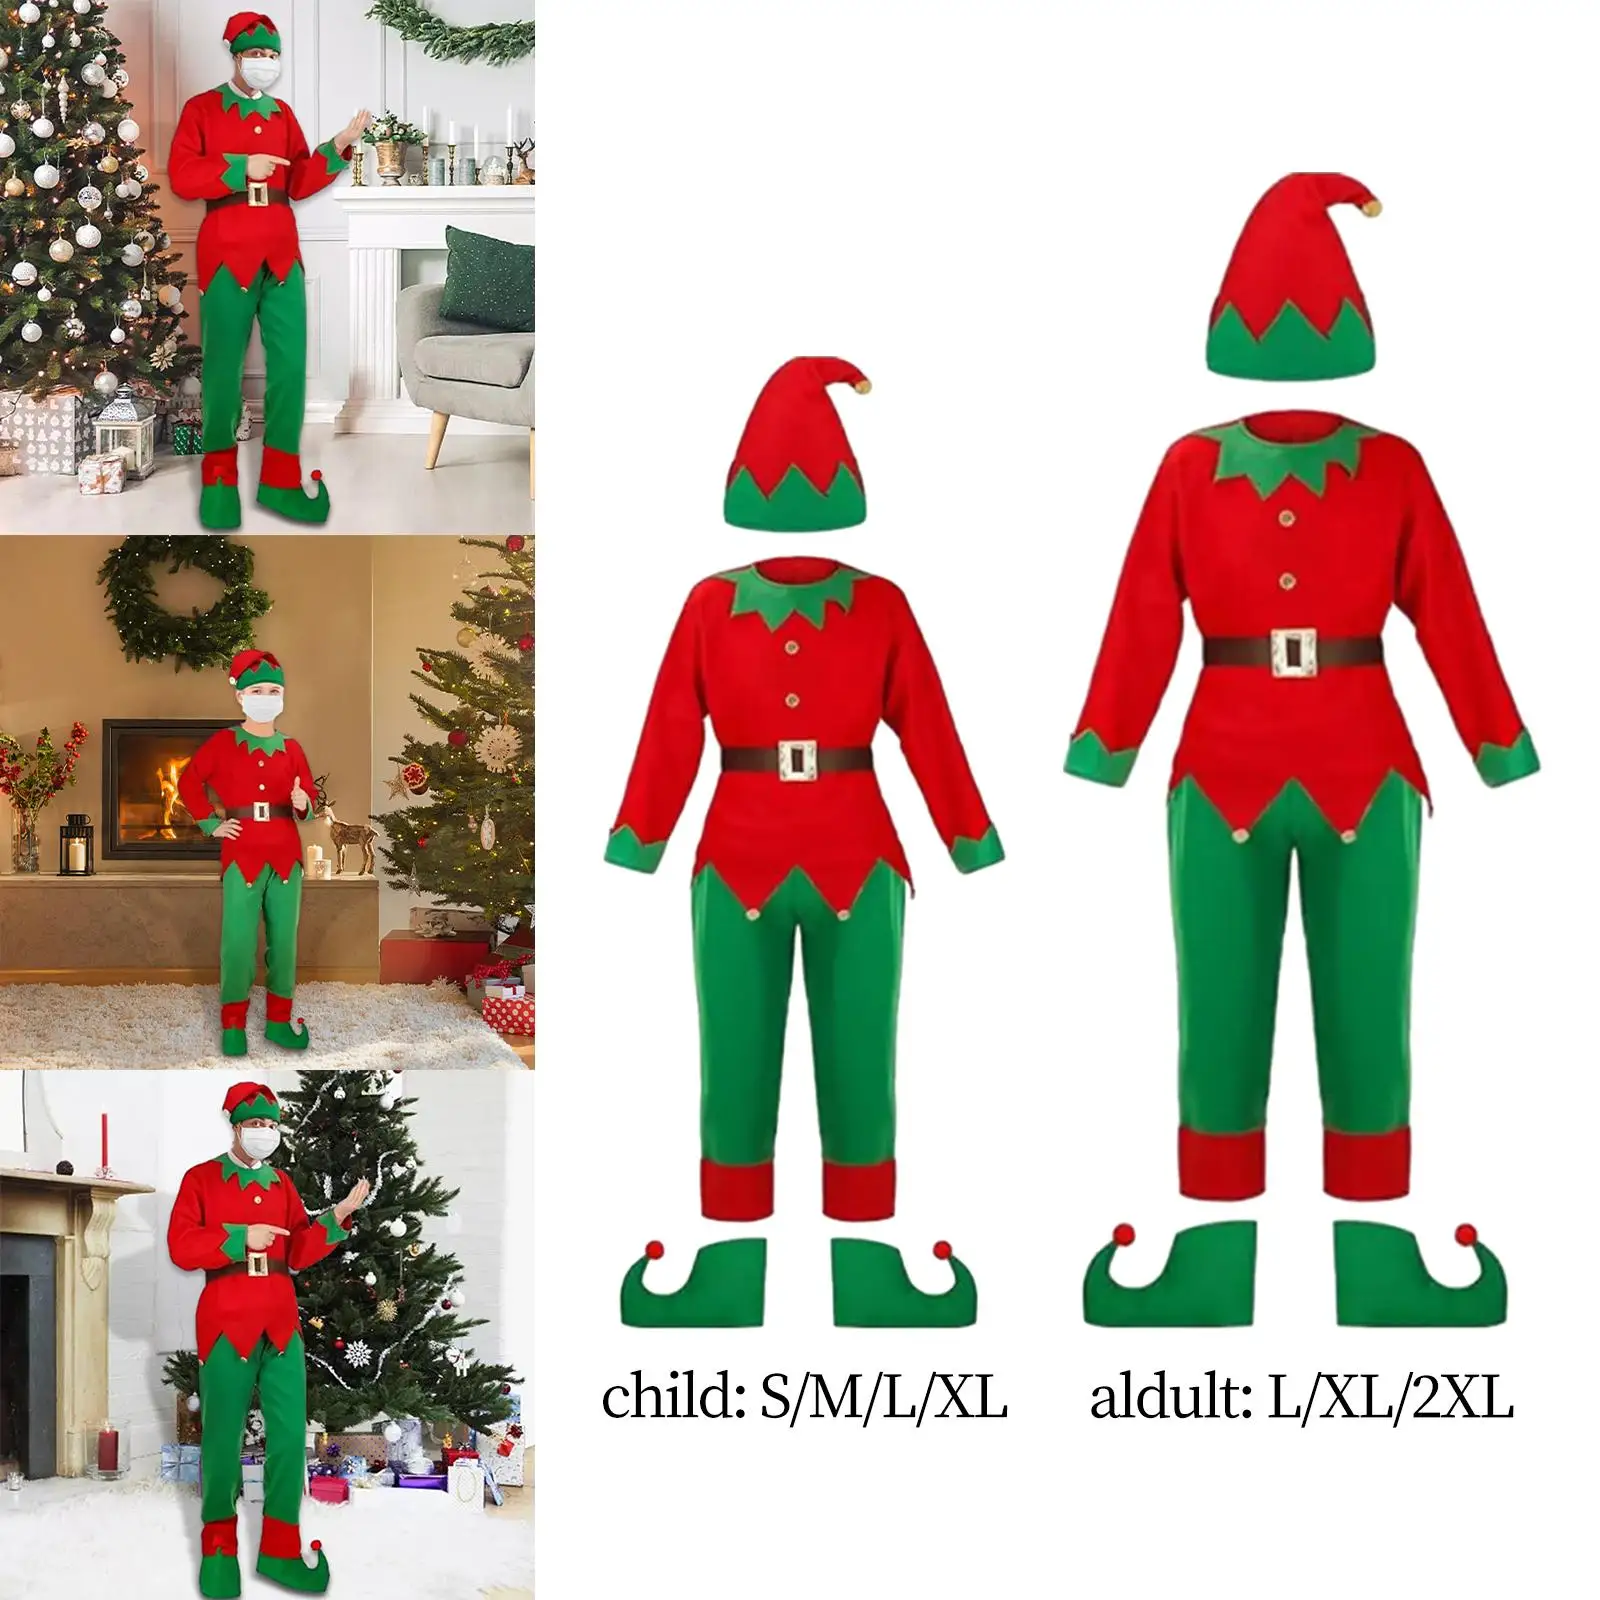 Christmas Elf Costumes Xmas Outfit Clothes with Elf Hat Shoes Cover Belt Elf Cosplay Costume for Festive New Year Role Play